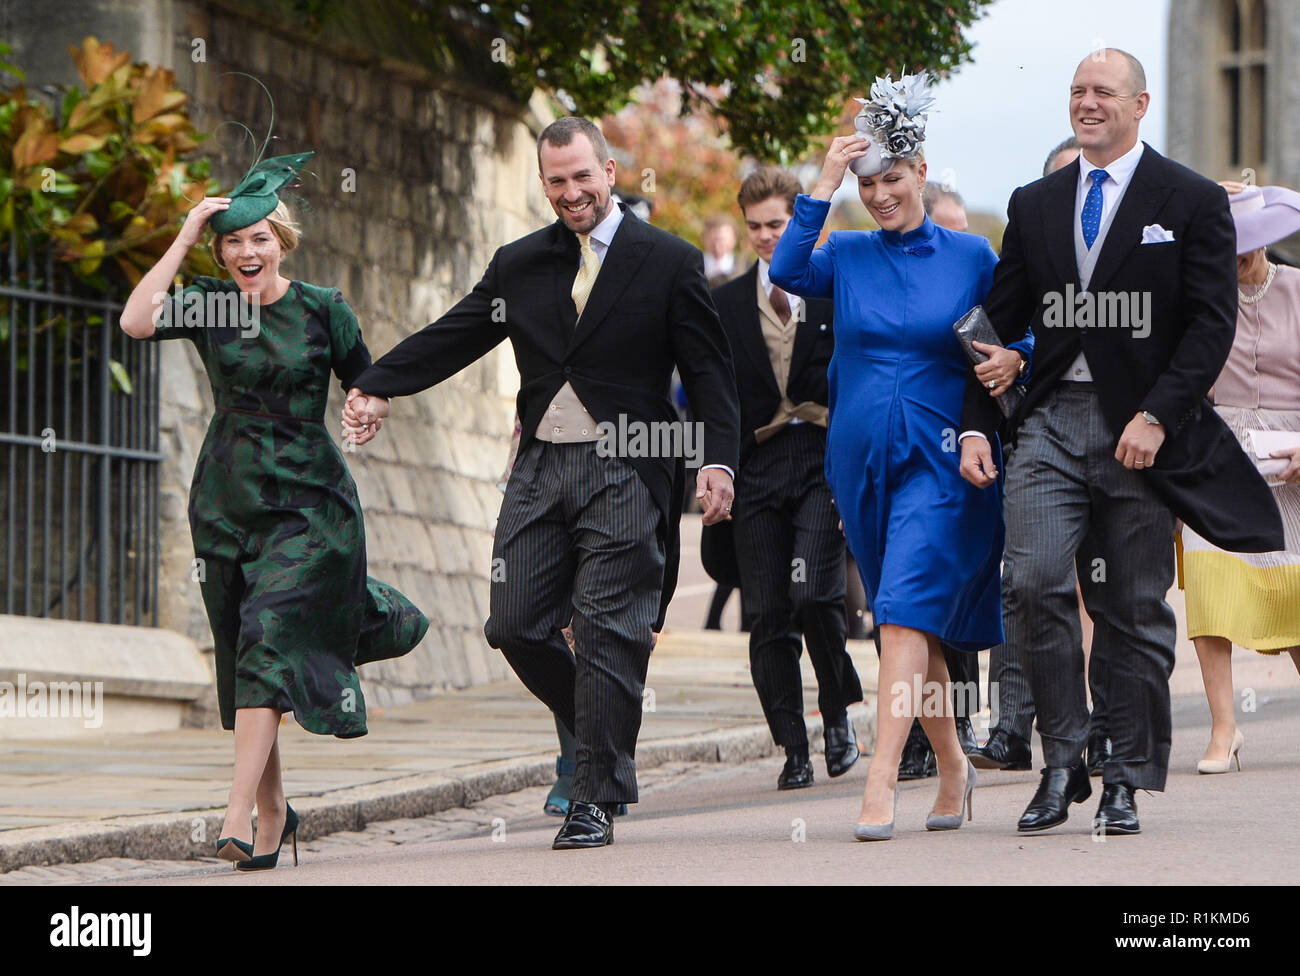 The wedding of Princess Eugenie of York and Jack Brooksbank in Windsor  Featuring: Autumn Phillips, Peter Phillips, Zara Tindall, Zara Phillips,  Mike Tindall Where: Windsor, United Kingdom When: 12 Oct 2018 Credit: